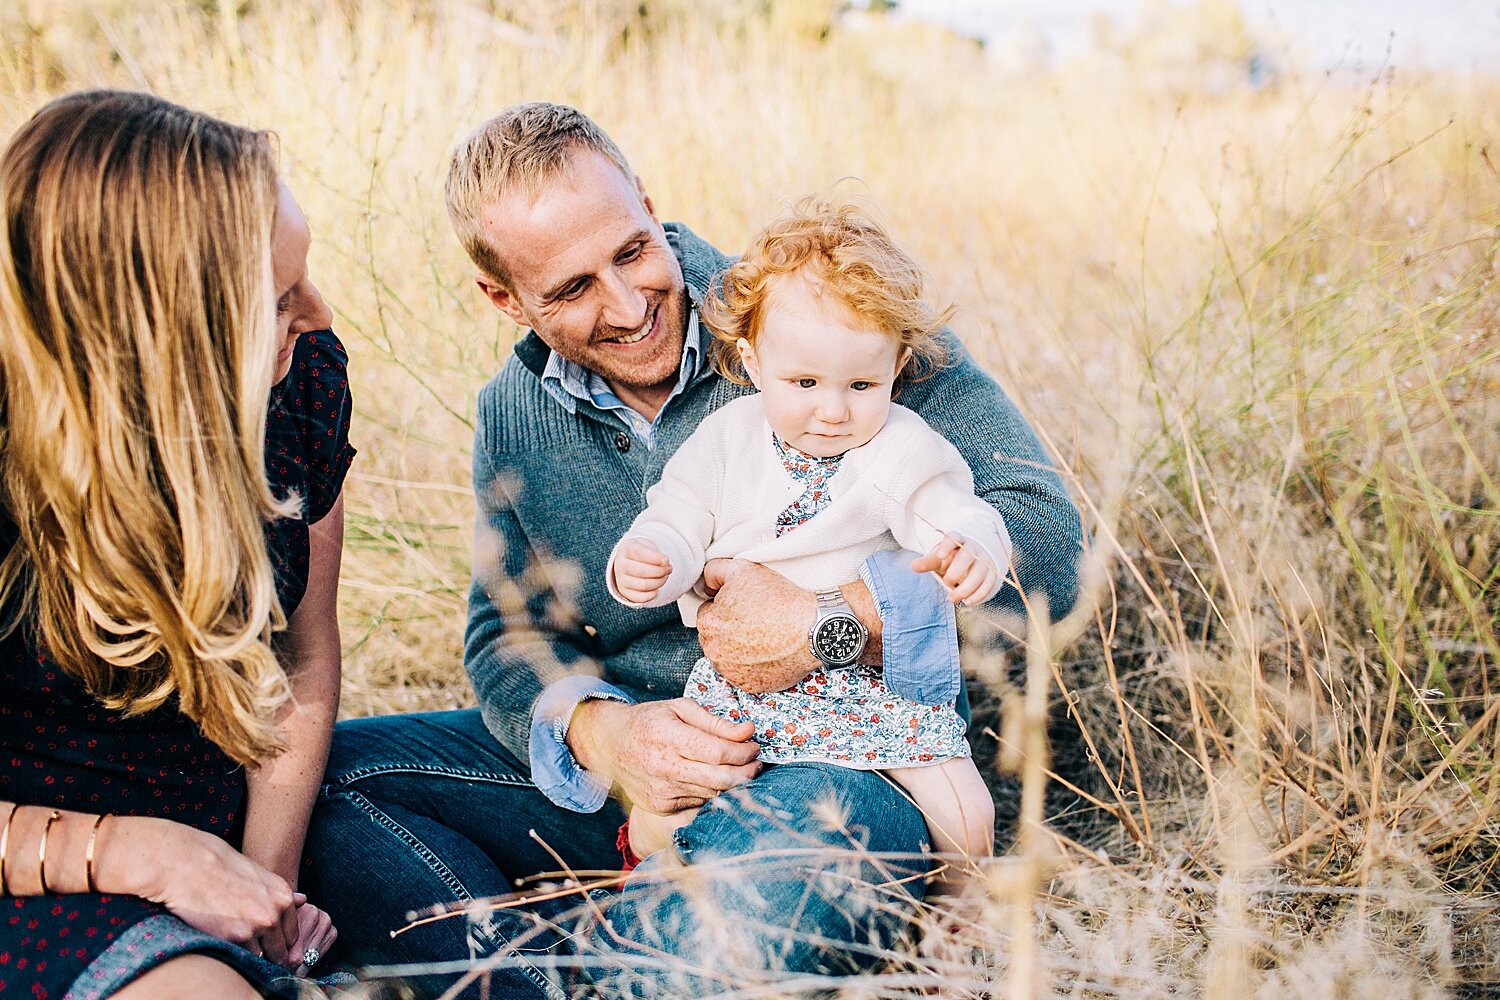 Boise Foothills Family Photos